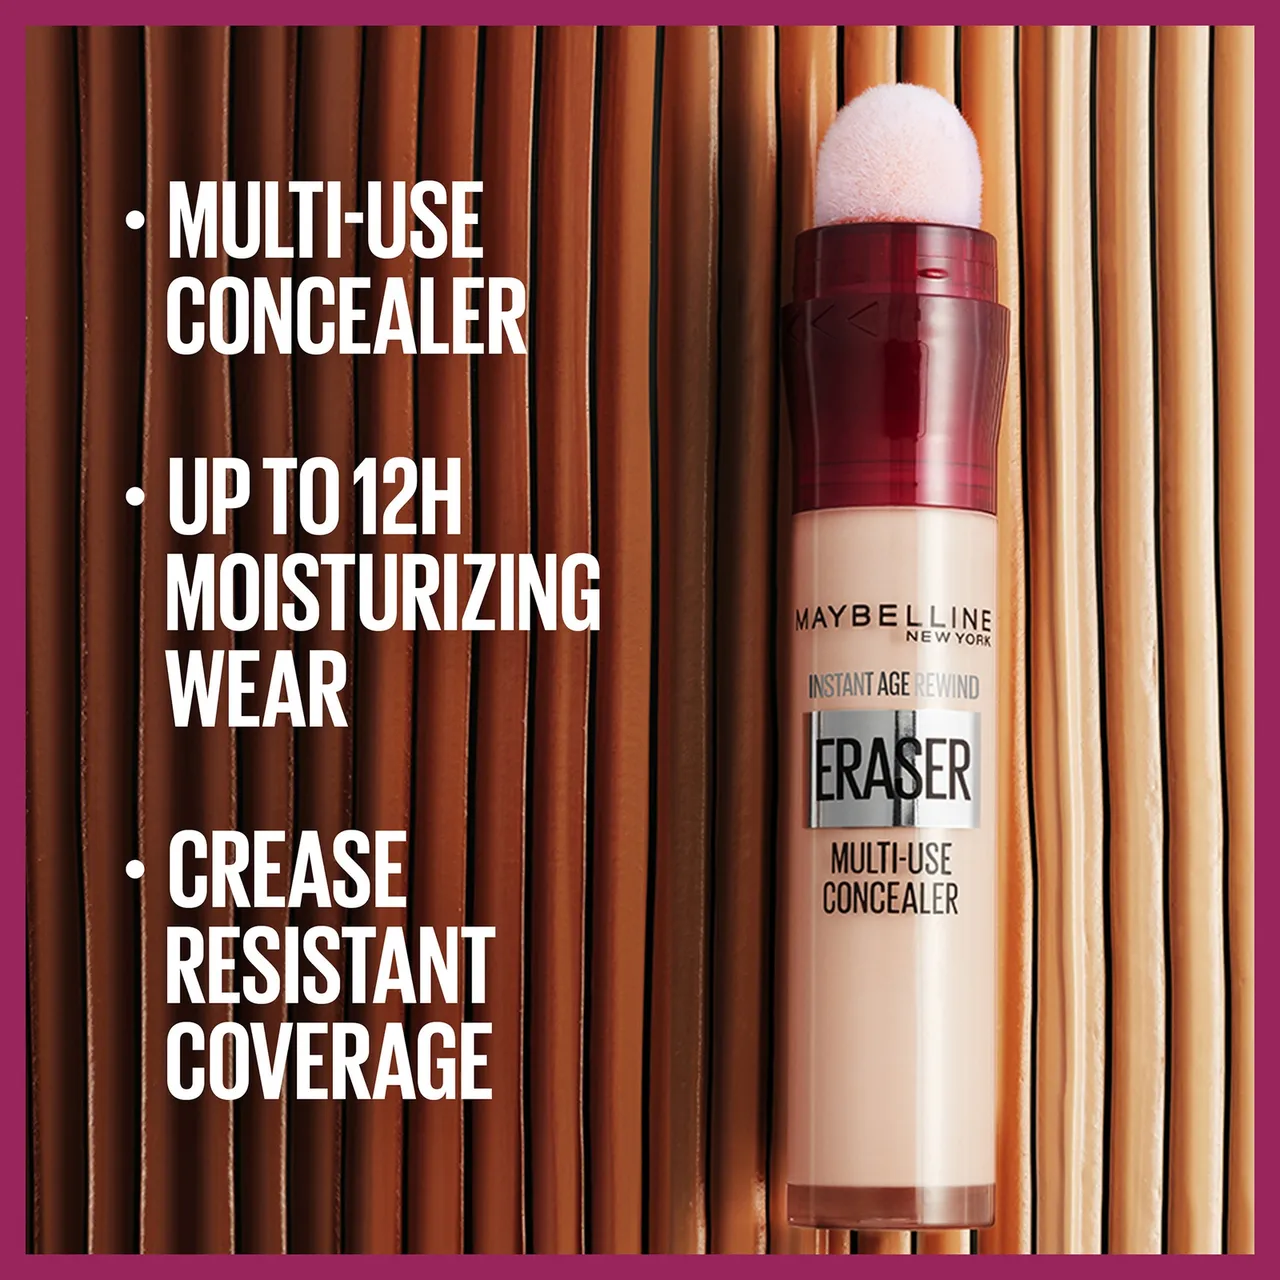 Maybelline Instant Anti Age Eraser Concealer 6.8ml (Various Shades) - 11 Tan